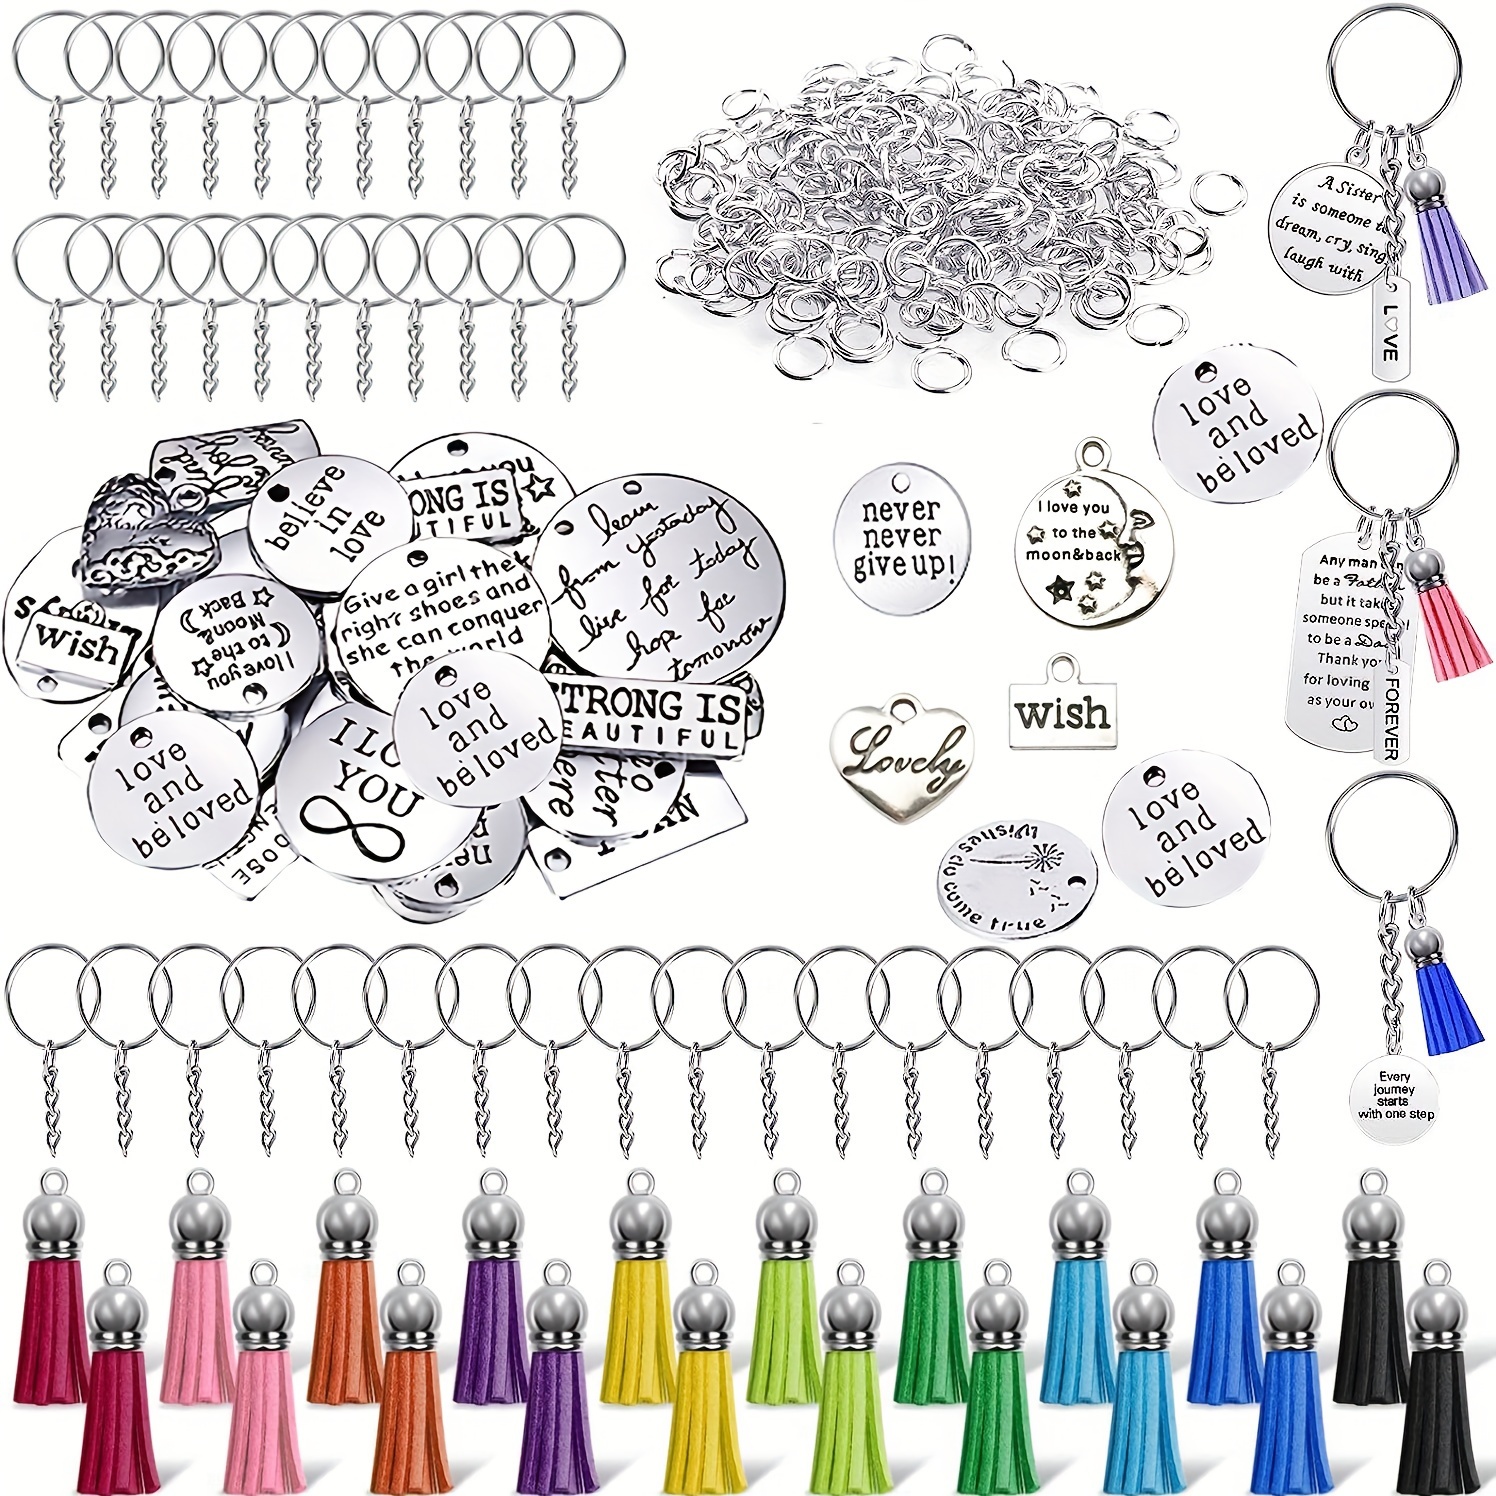 80 Pcs Beadable Keychain Bars, DIY Keychain Making Kit, Resealable Pouch Bag and Thank You Cards Set, Tassels, Diverse Colors, Keychain Supplies for